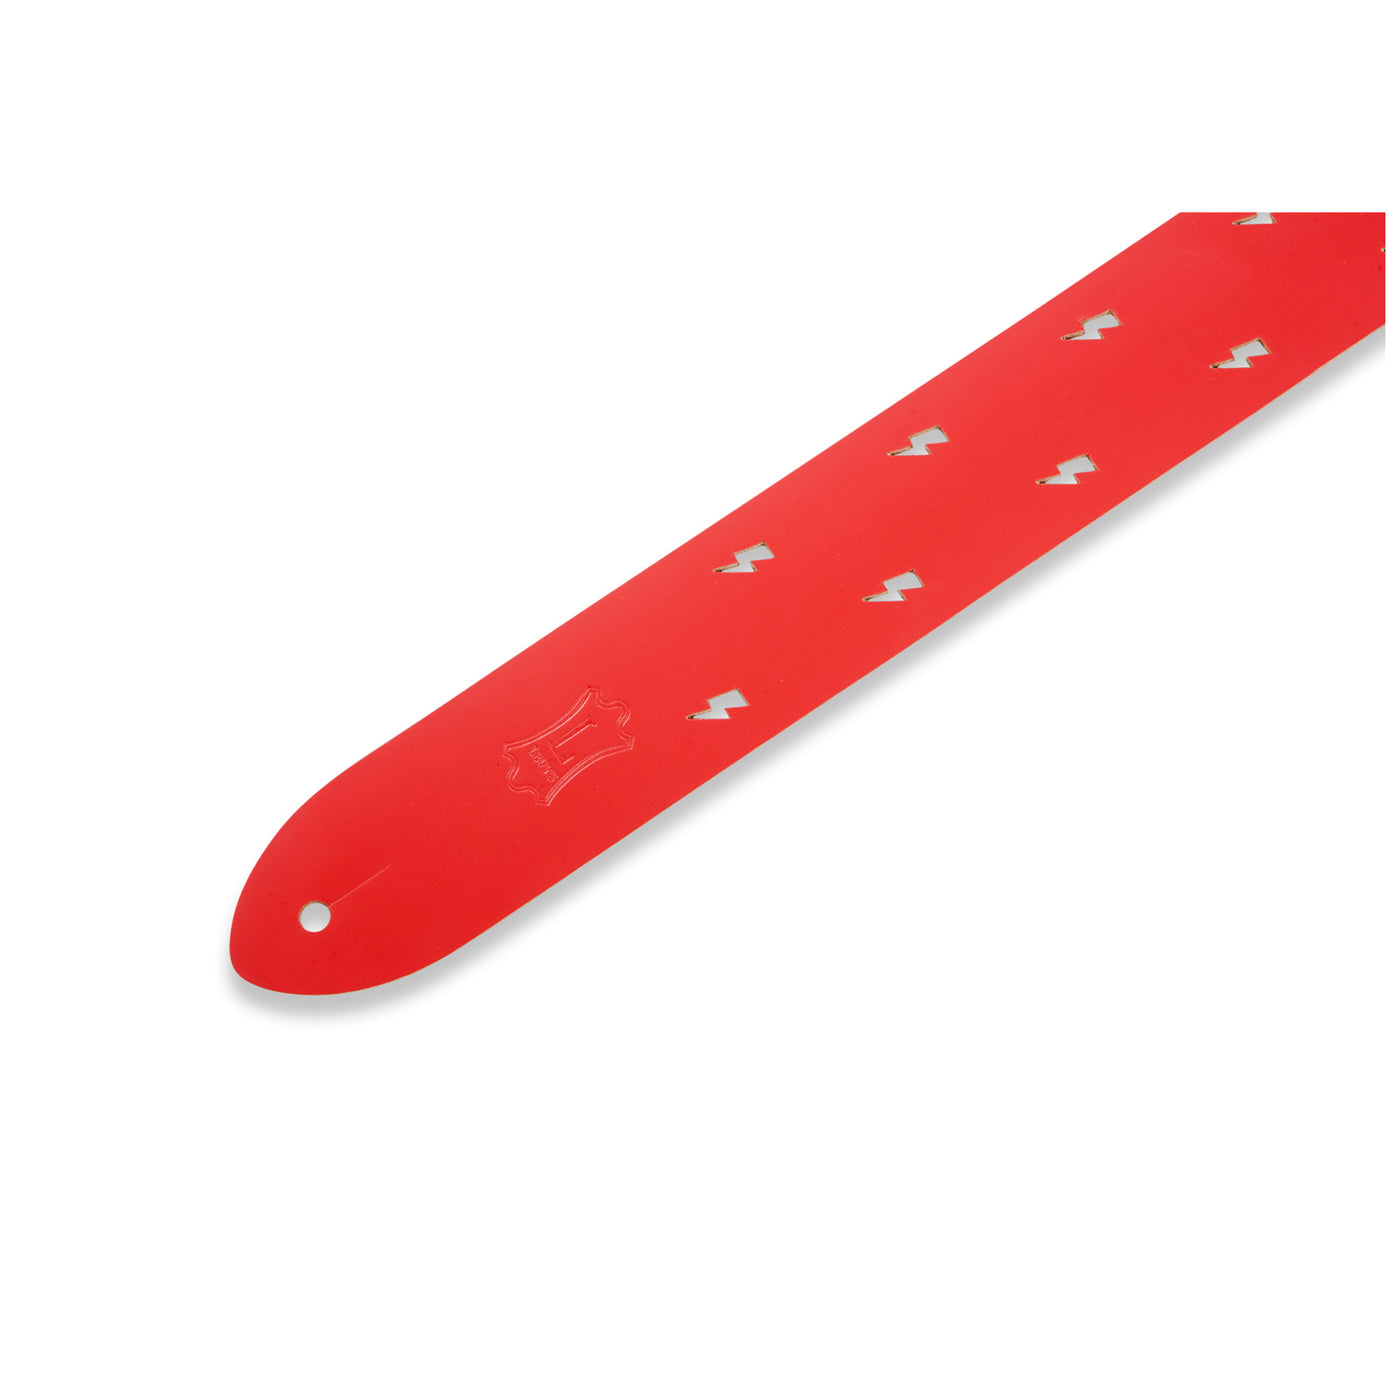 Levy's 2" Bolt Punch Out Strap in Red